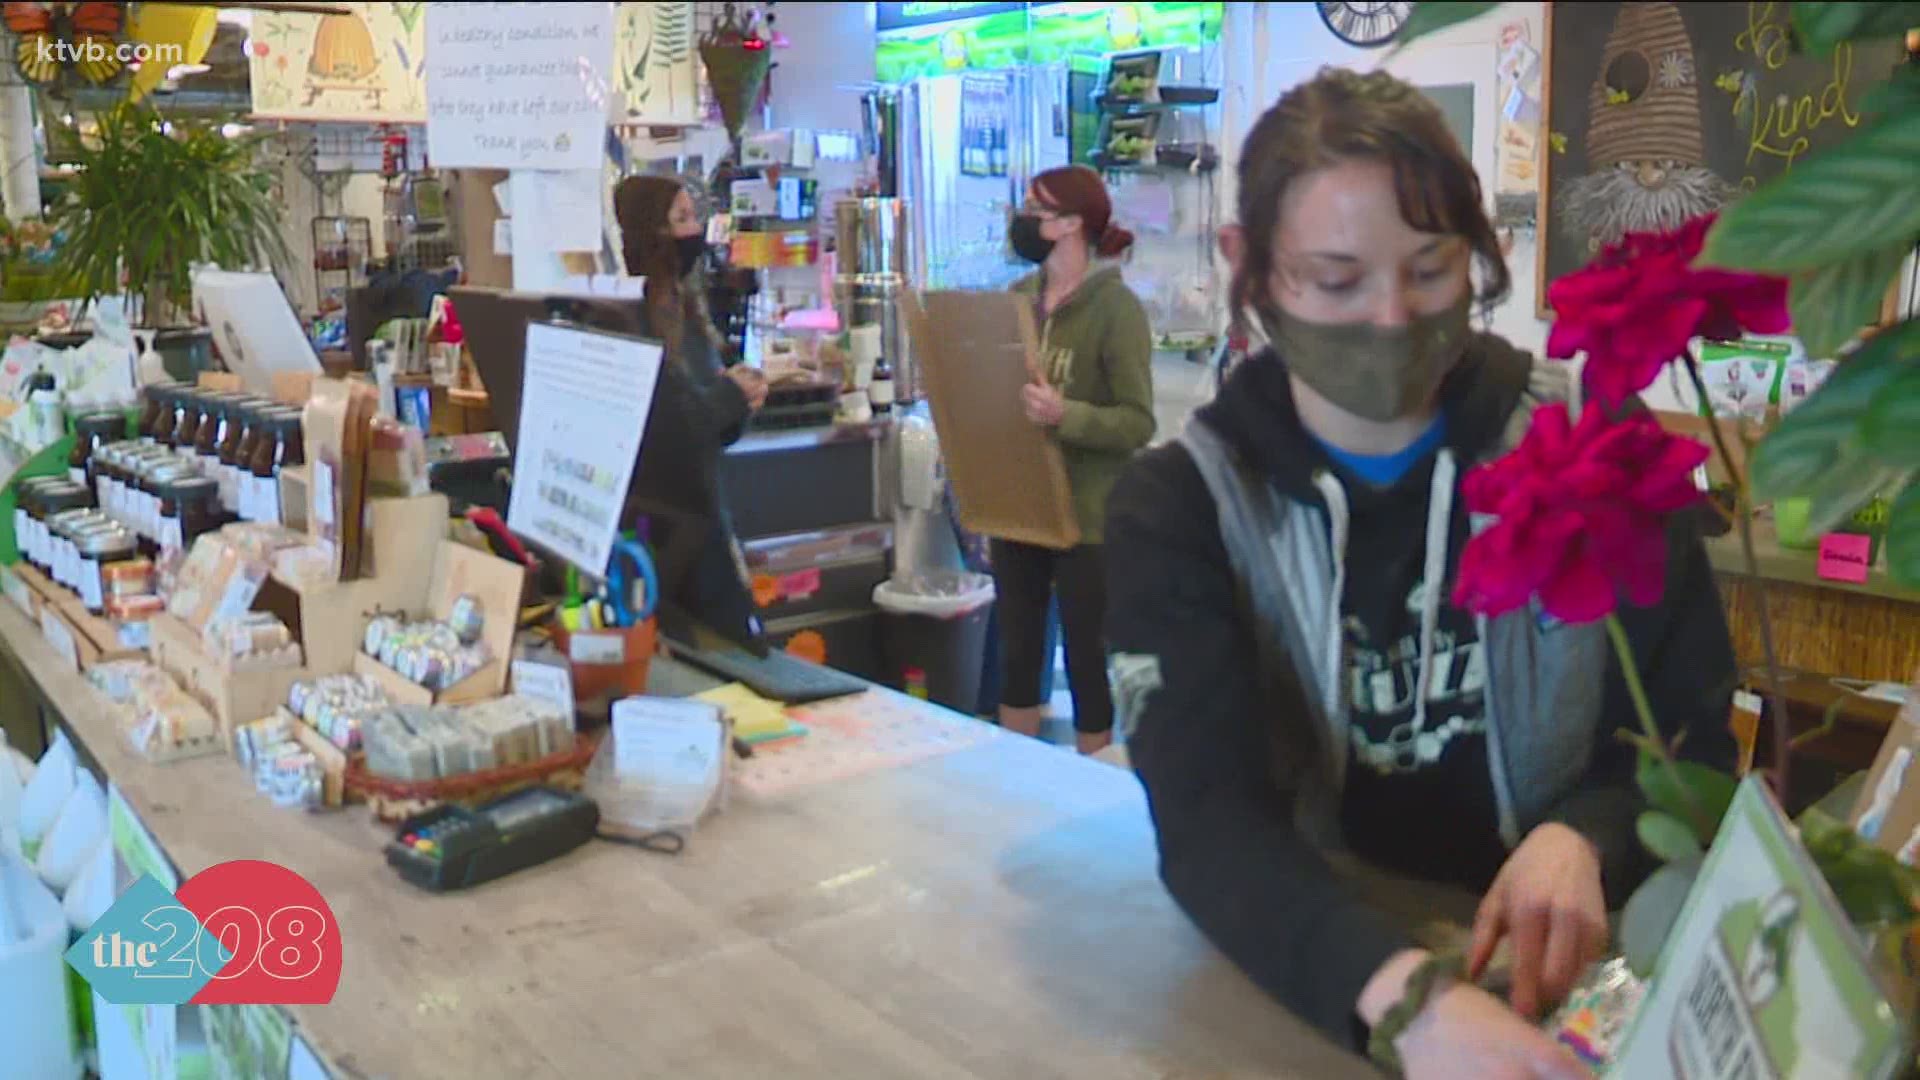 While the CDC says fully-vaccinated people can largely ditch the face masks indoors, some Idahoans are not ready to do so.